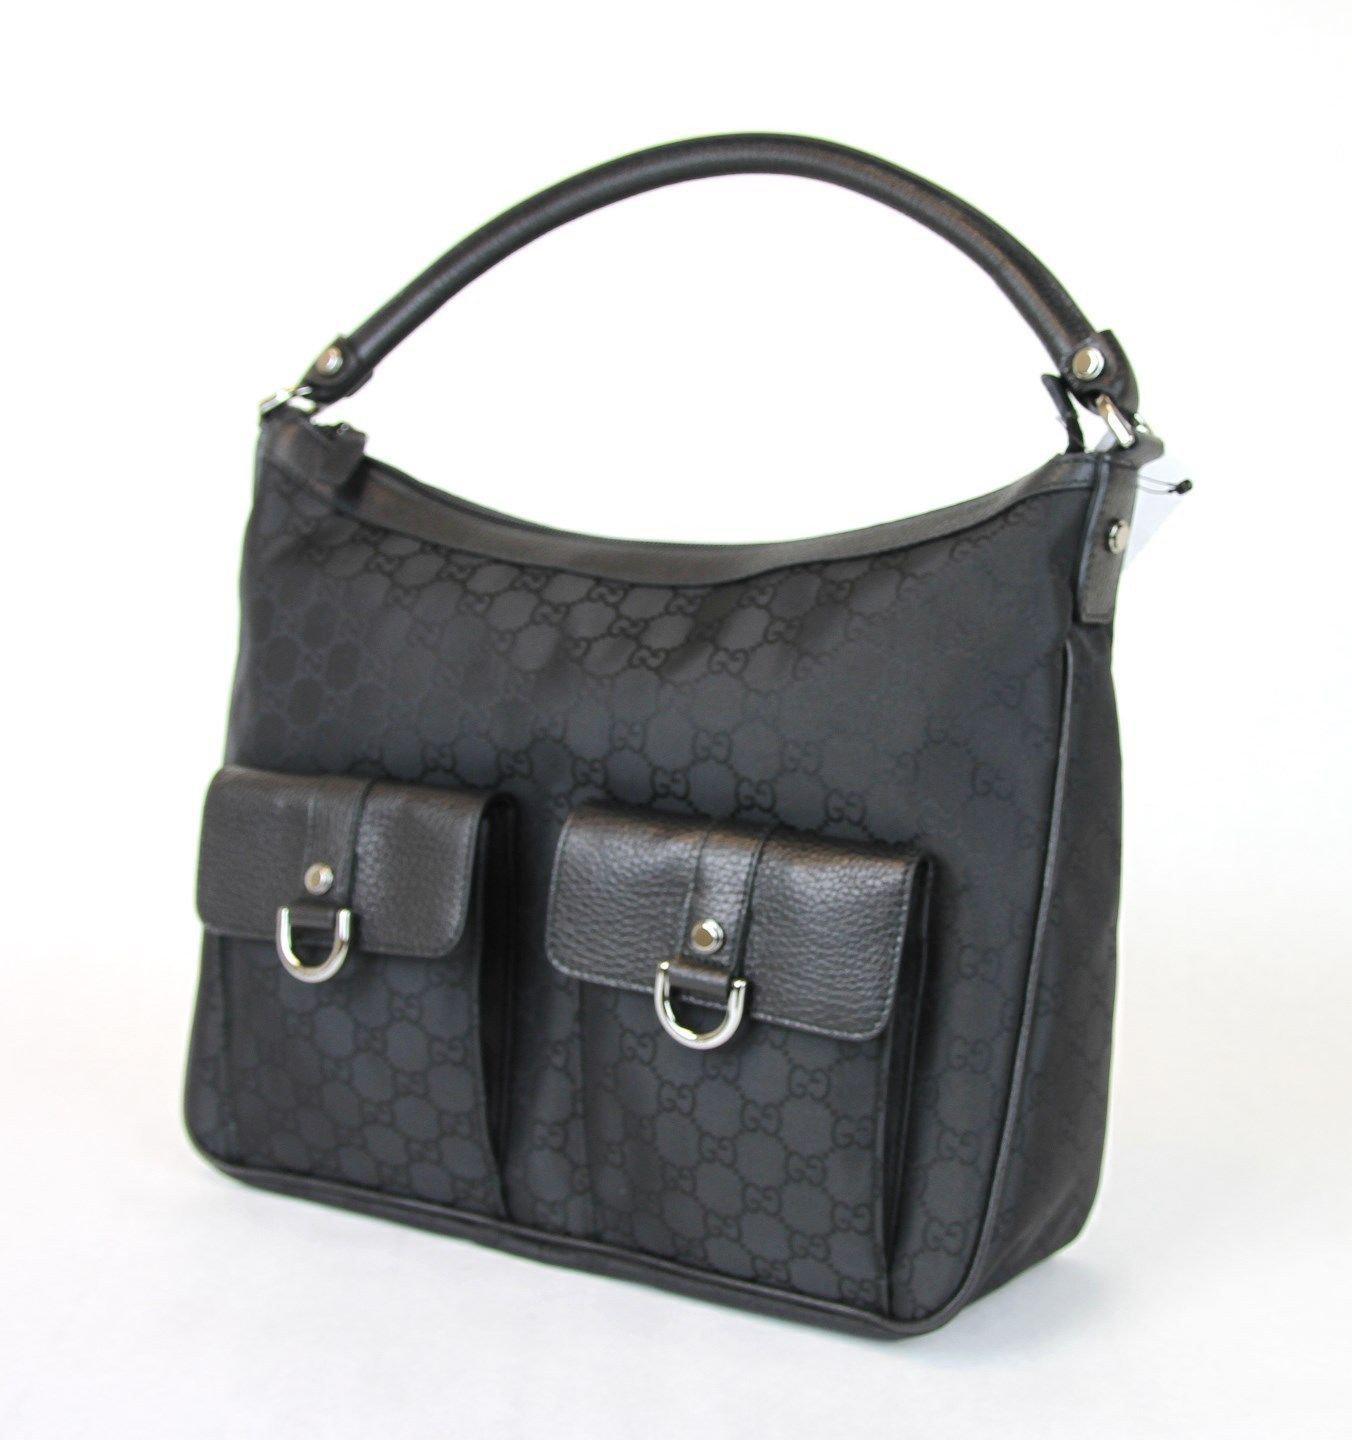 Abbey leather handbag Gucci Black in Leather - 32227541